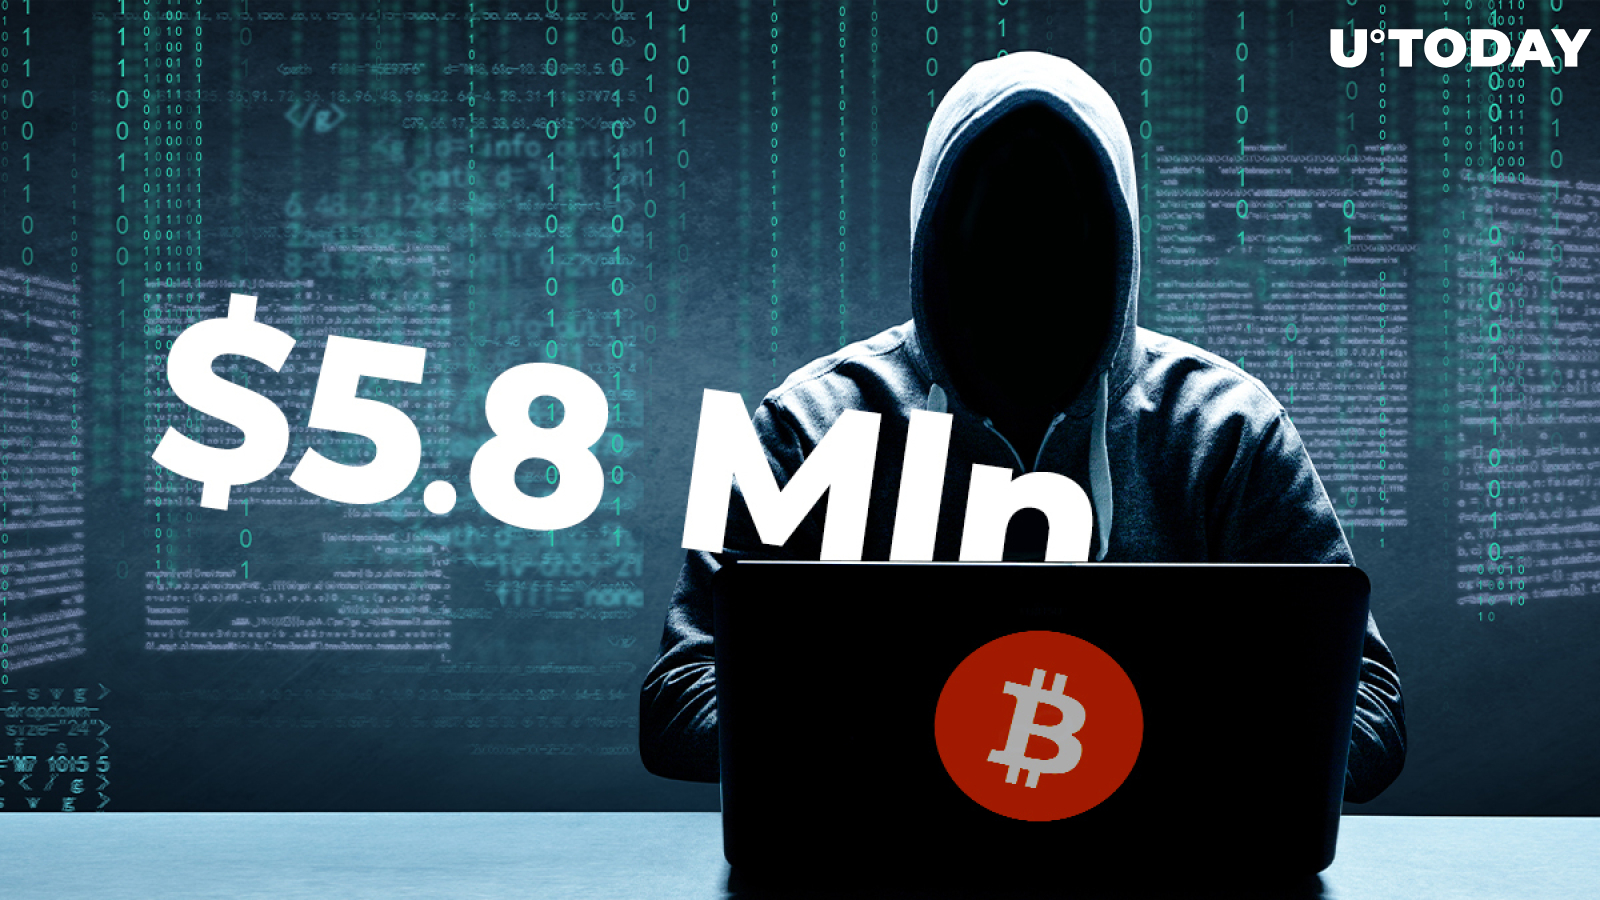 Hackers Move $5.8 Mln in Bitcoin from Coins Stolen in 2016, Ignoring Bitfinex Offer of Reward for Returning BTC